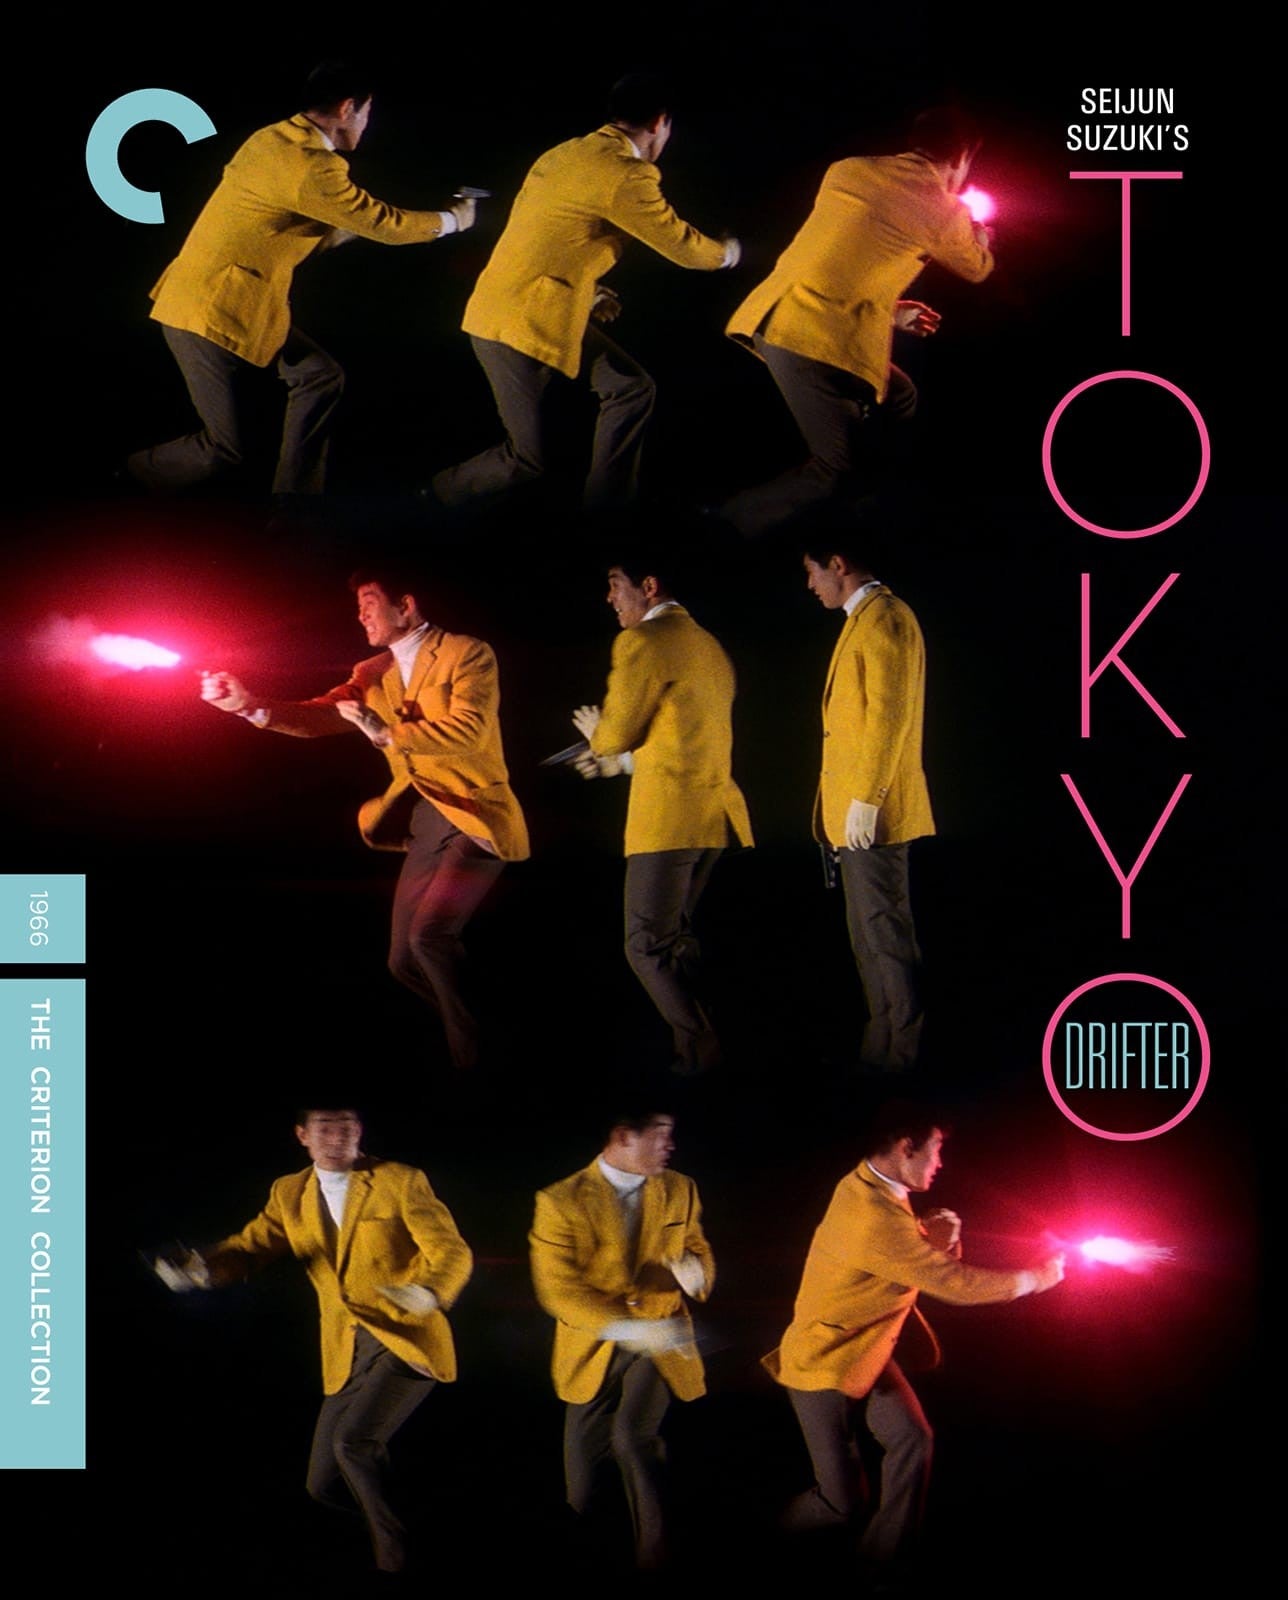 Tokyo Drifter - Criterion Collection (Blu-ray)